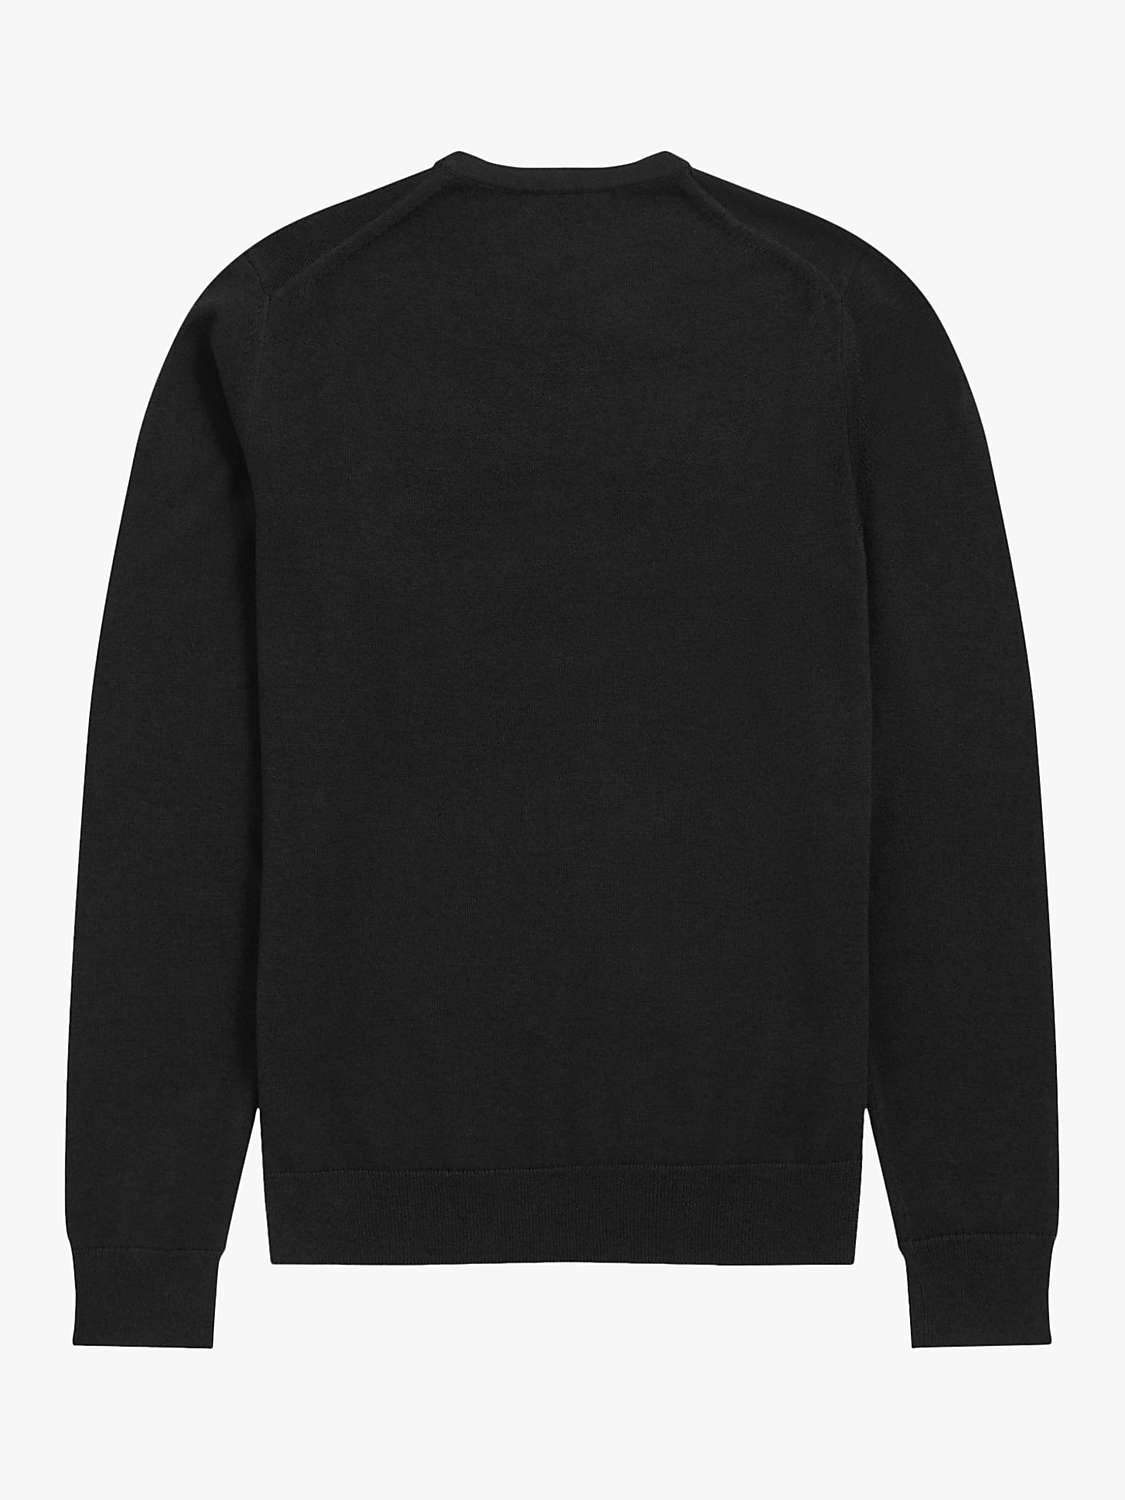 Buy Fred Perry Classic Crew Neck Knit Jumper Online at johnlewis.com